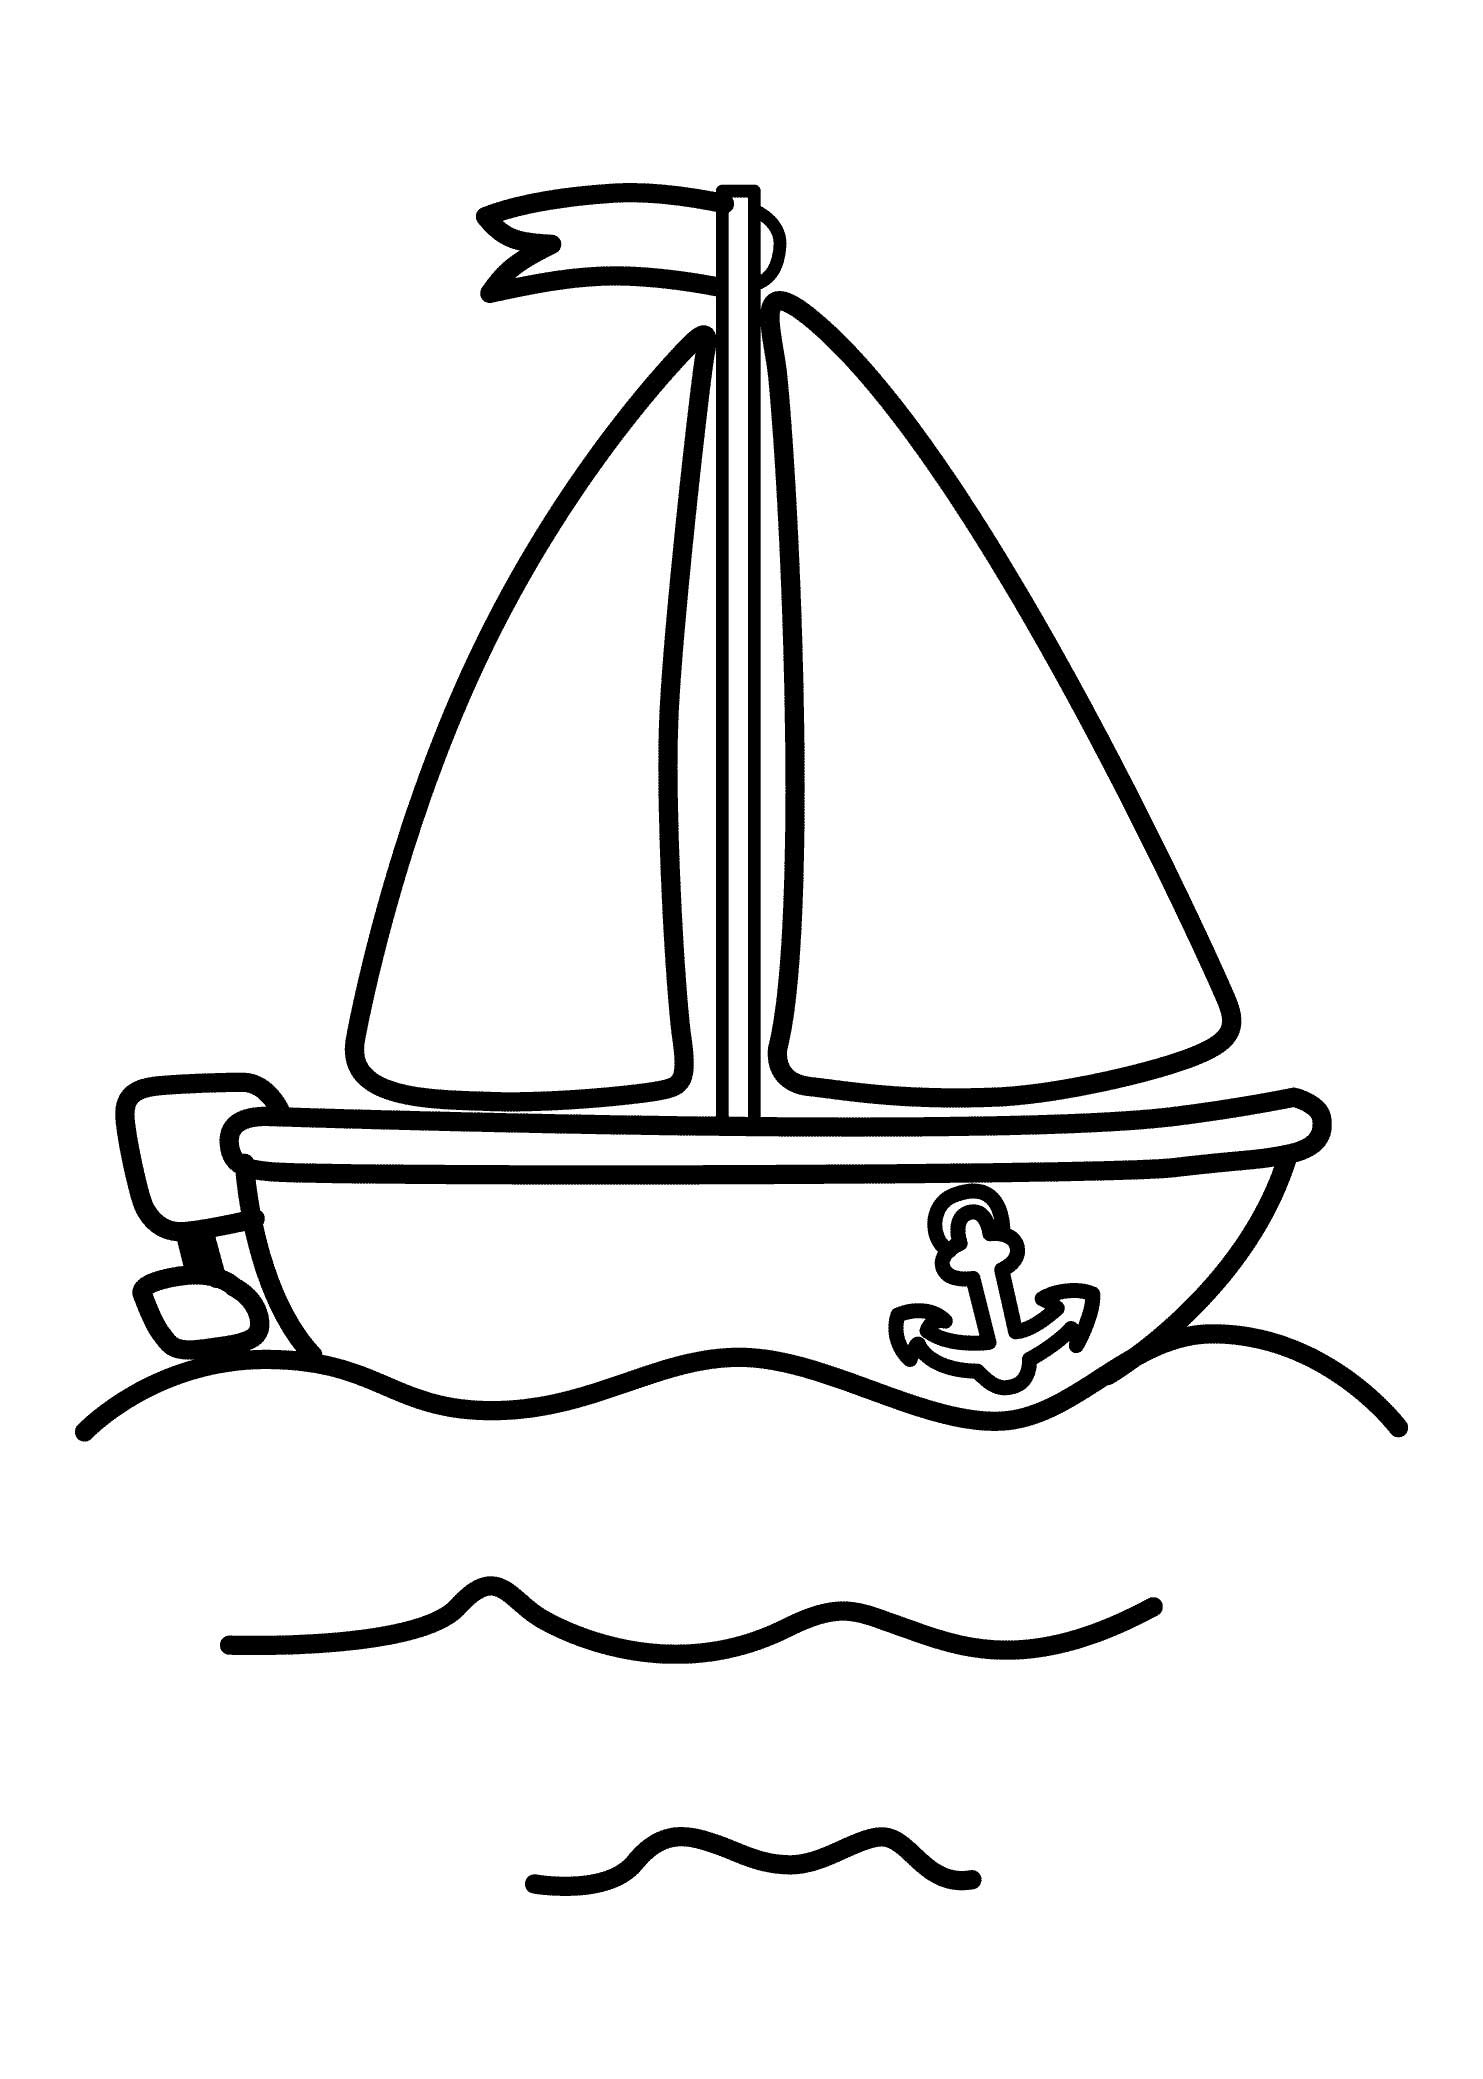 Boat Coloring Pages For Toddlers
 21 Printable Boat Coloring Pages Free Download